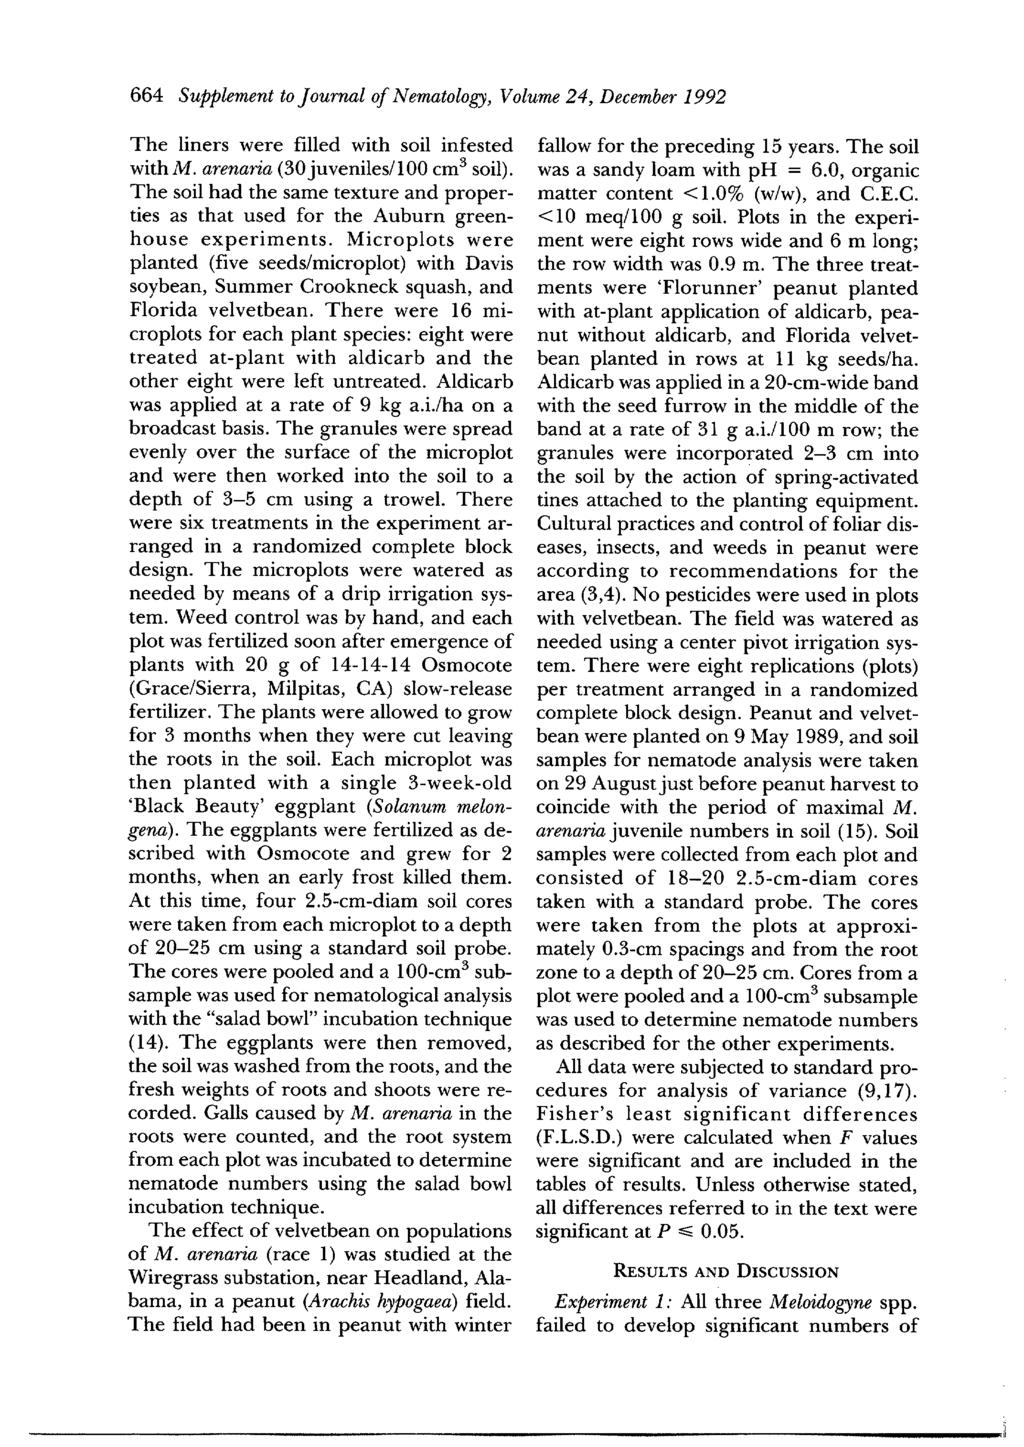 664 Supplement to Journal of Nematology, Volume 24, December 1992 The liners were filled with soil infested with M. arenaria (30juveniles/100 cm ~ soil).